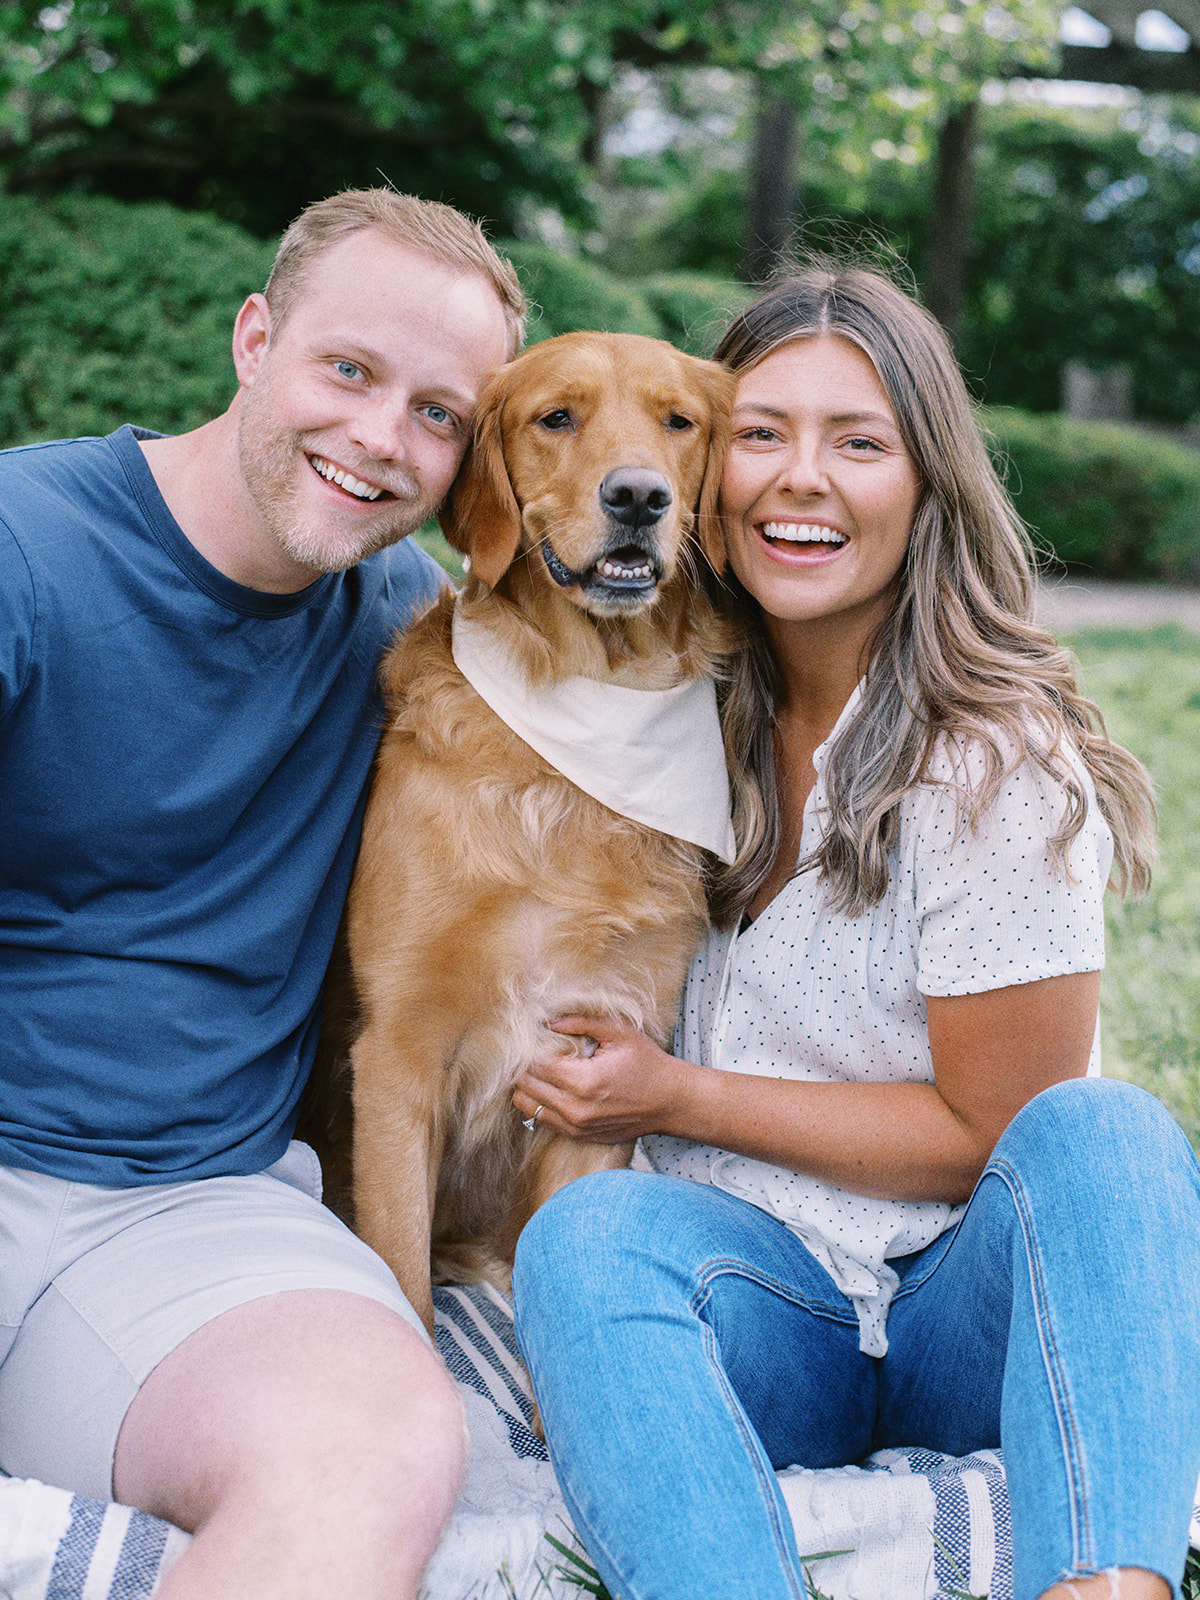 Engagement session with sweet dog, golden retriever